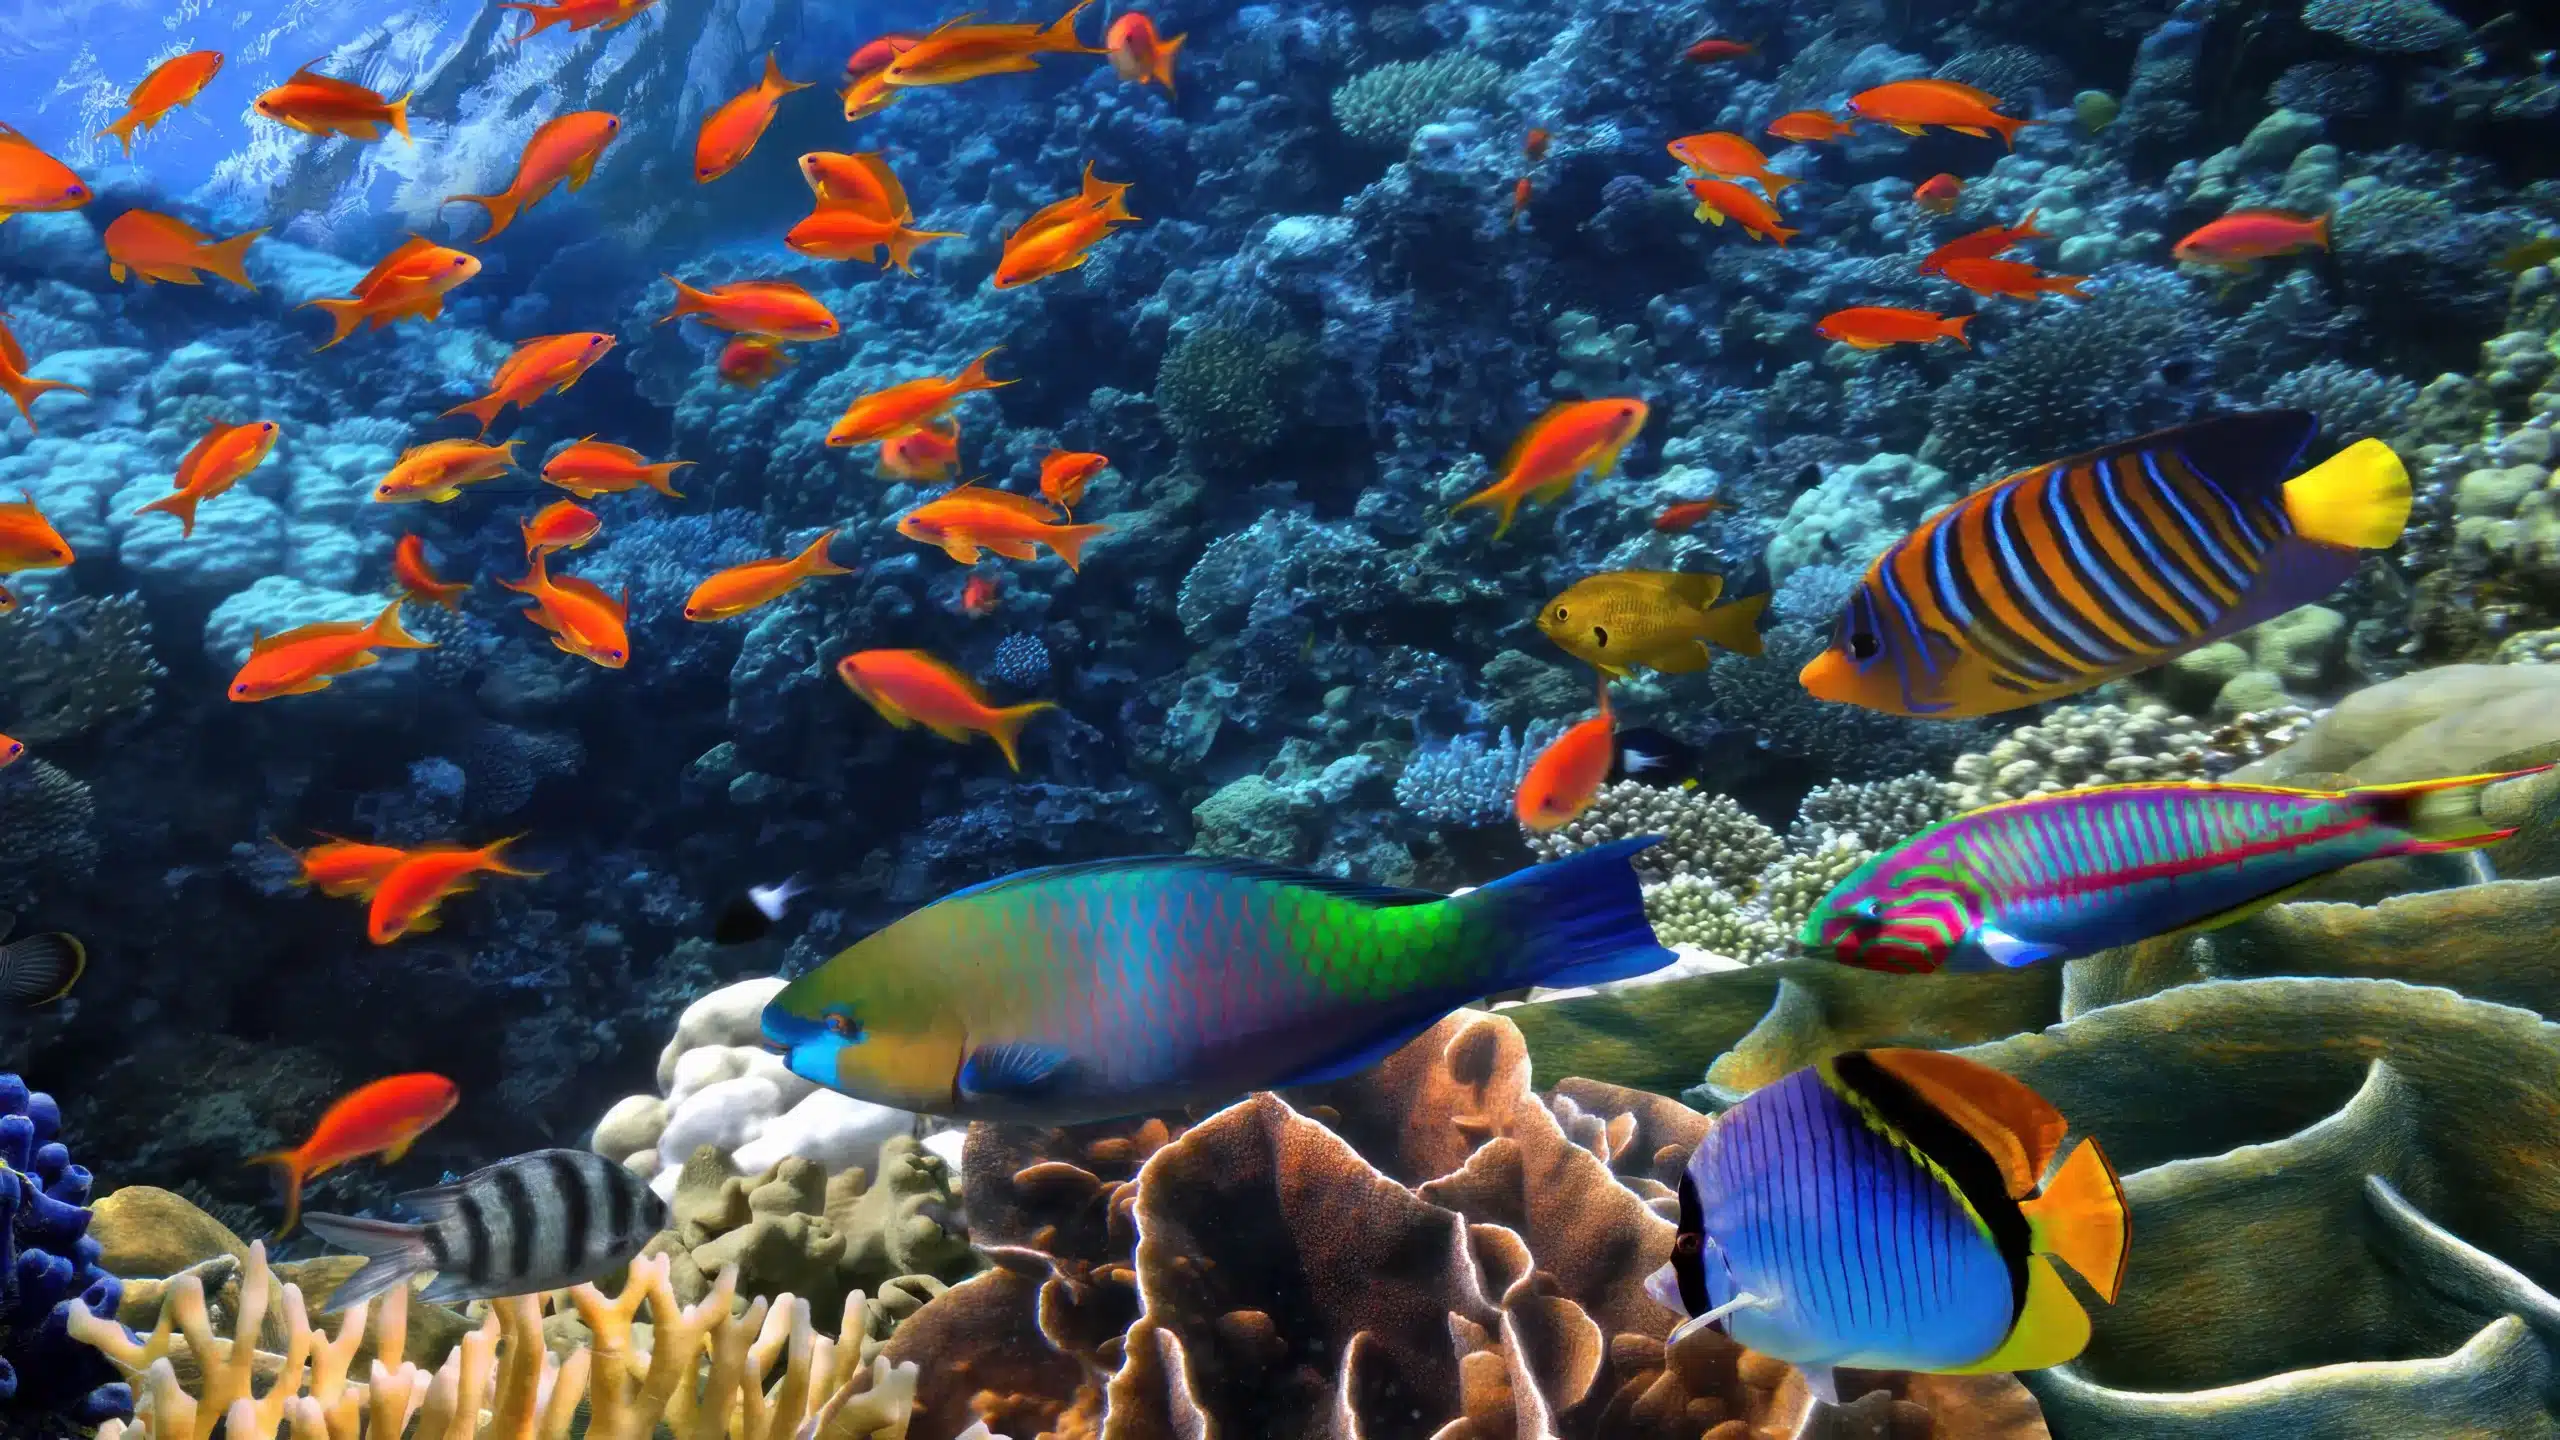 Colorful reef fish